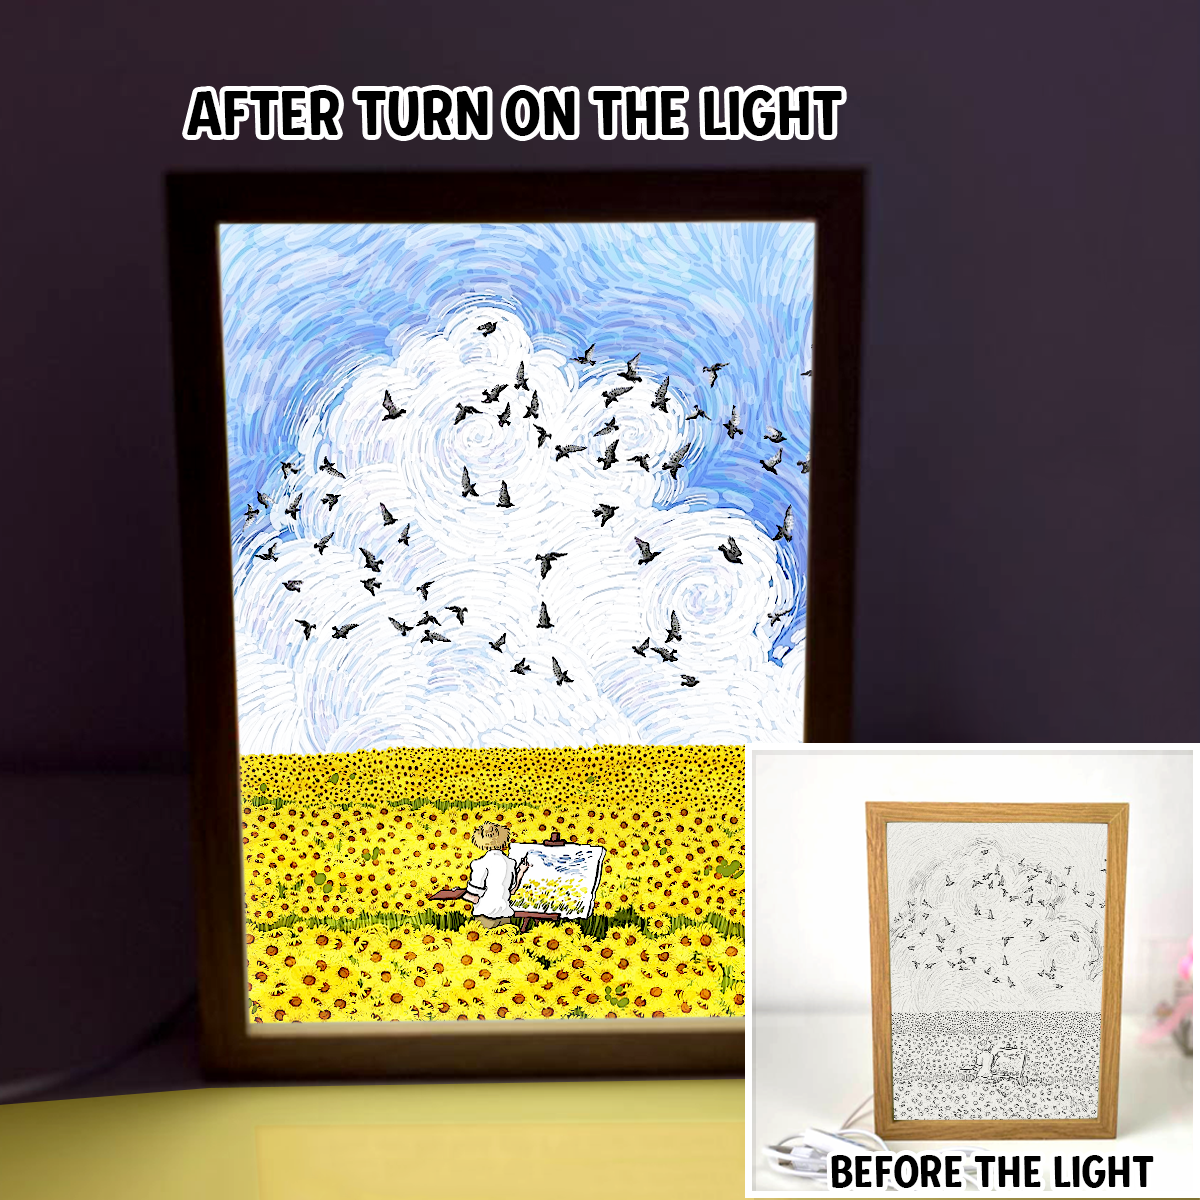 Drawing In The Middle Of Sunflower Field With Sunshine And Birds 4D Art Led Light Wooden Frame Night Light Decoration